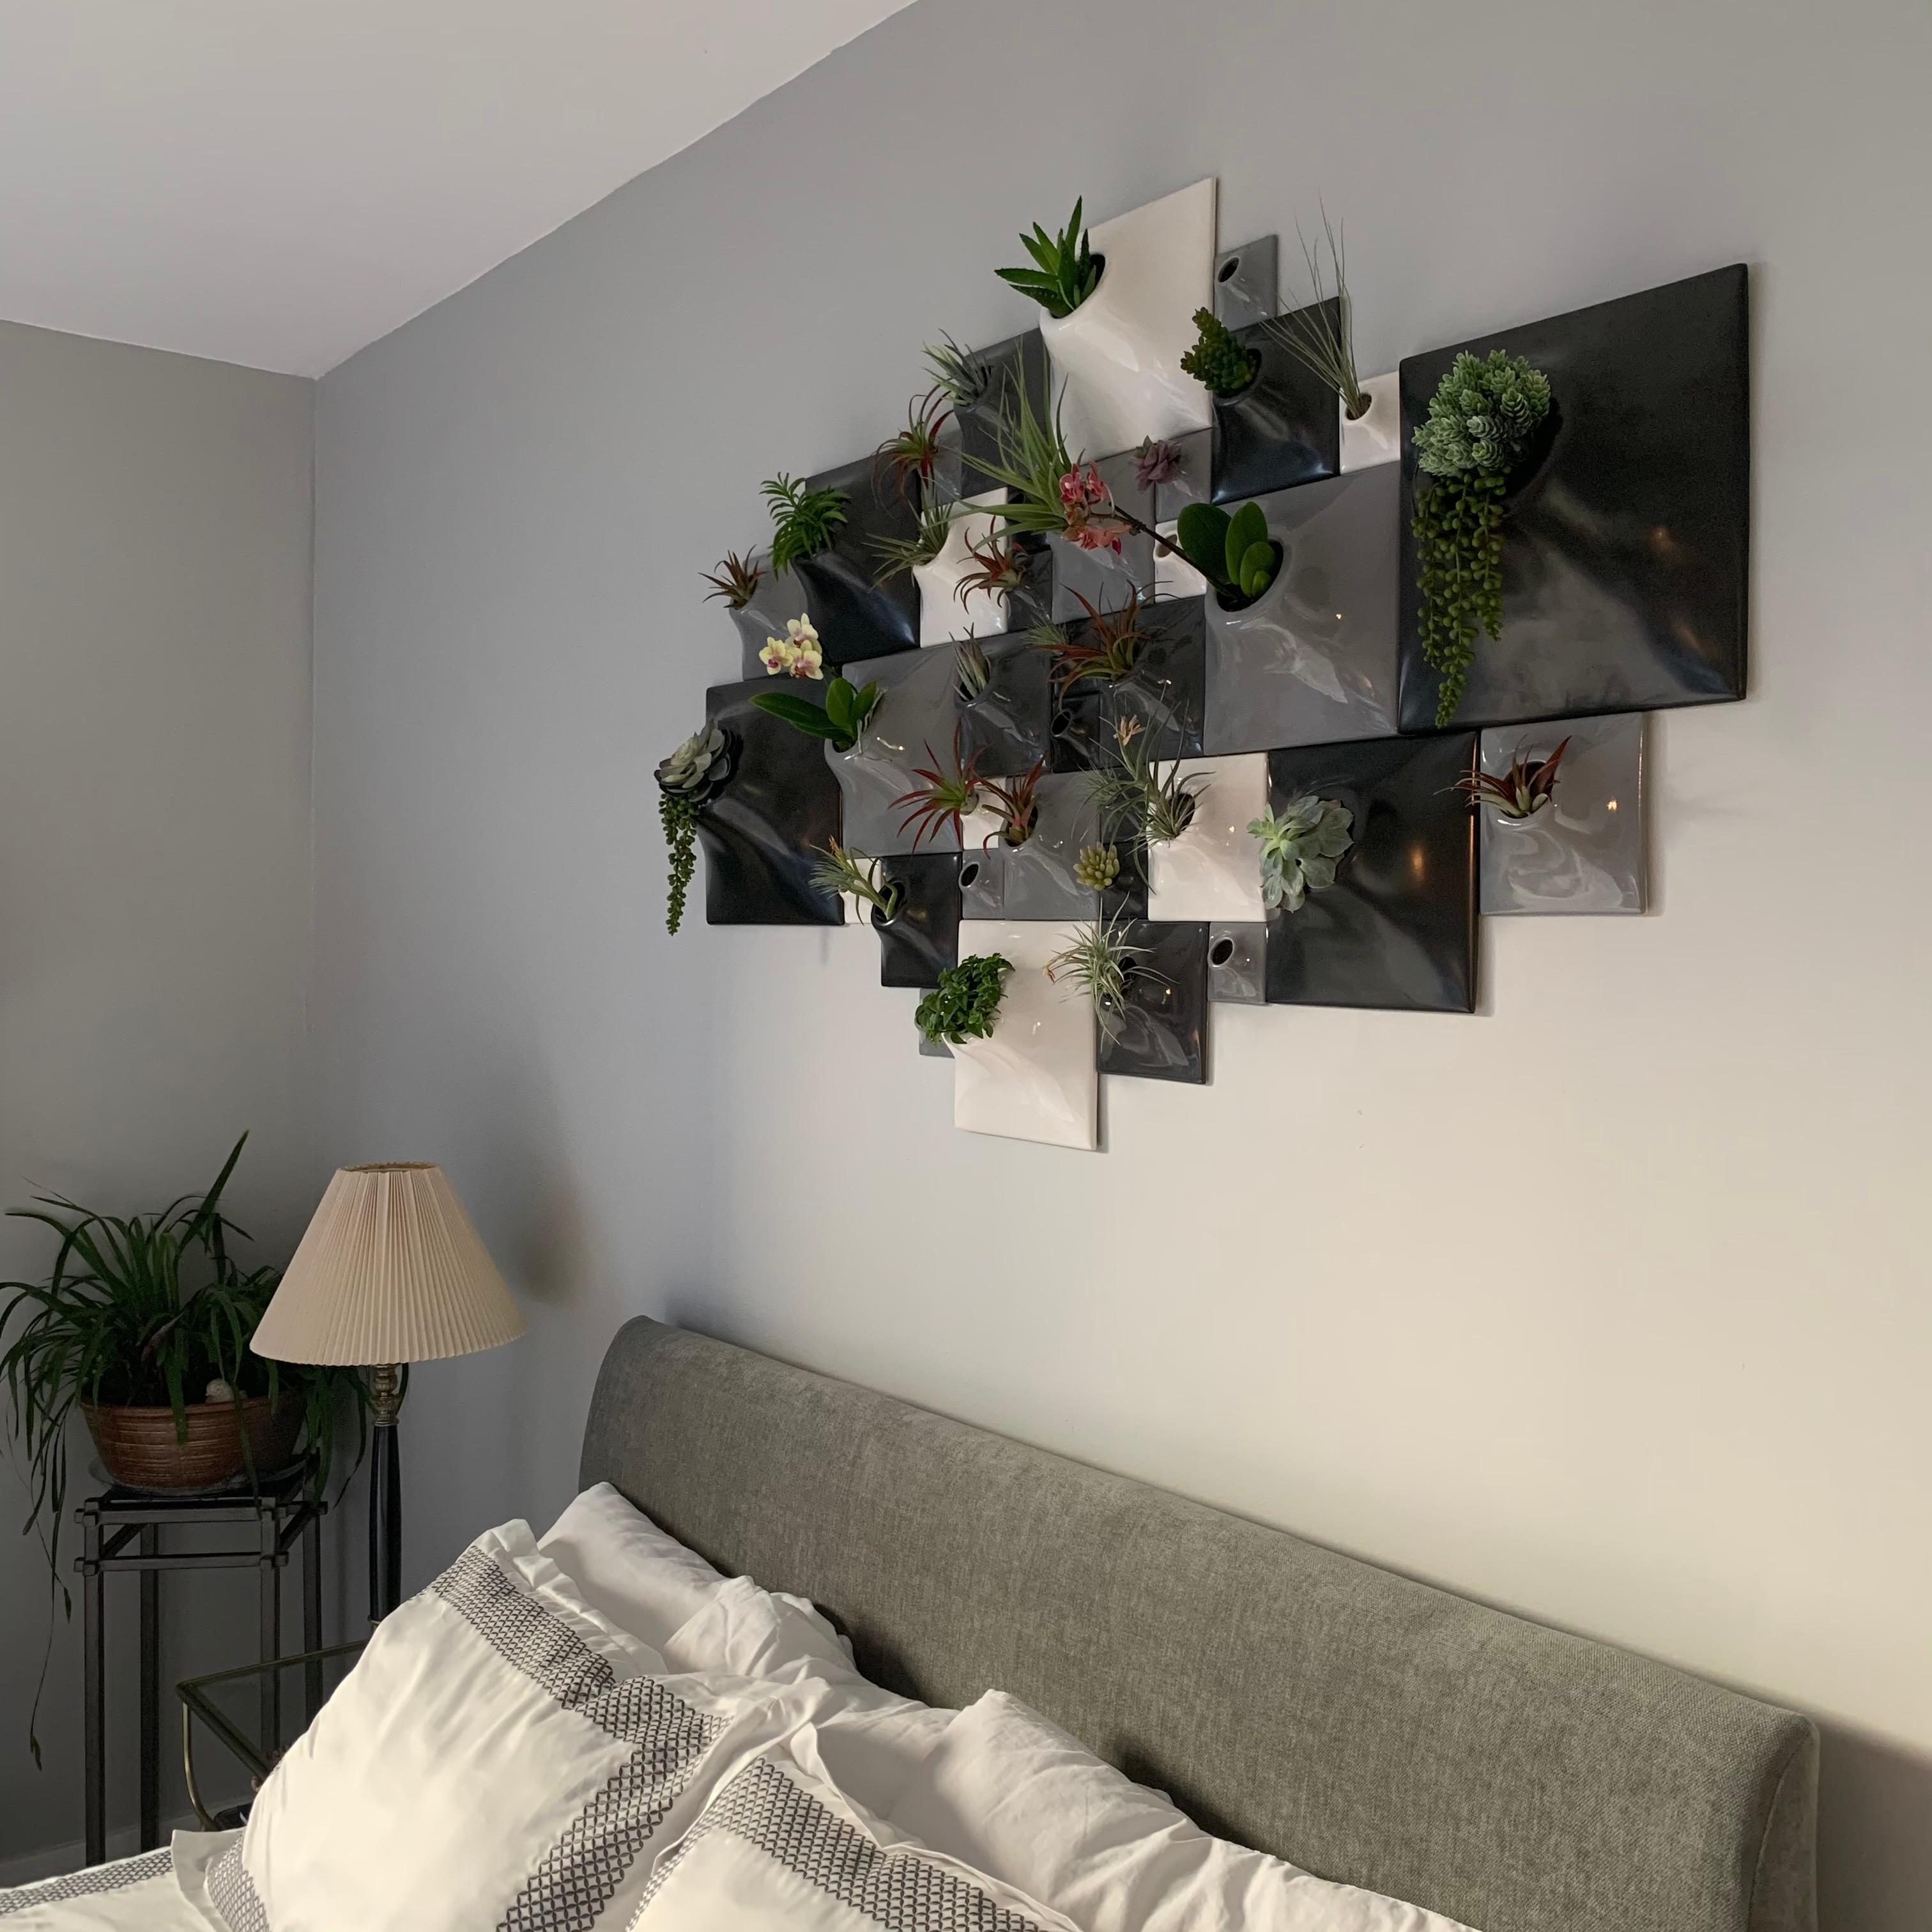 Node Wall Planter - Greenwall Set

Transform your modern home into an epicenter for living wall art with this configuration of Node wall planters available in five neutral glaze colors.  Let your eyes wander over this vertical sculpture garden above